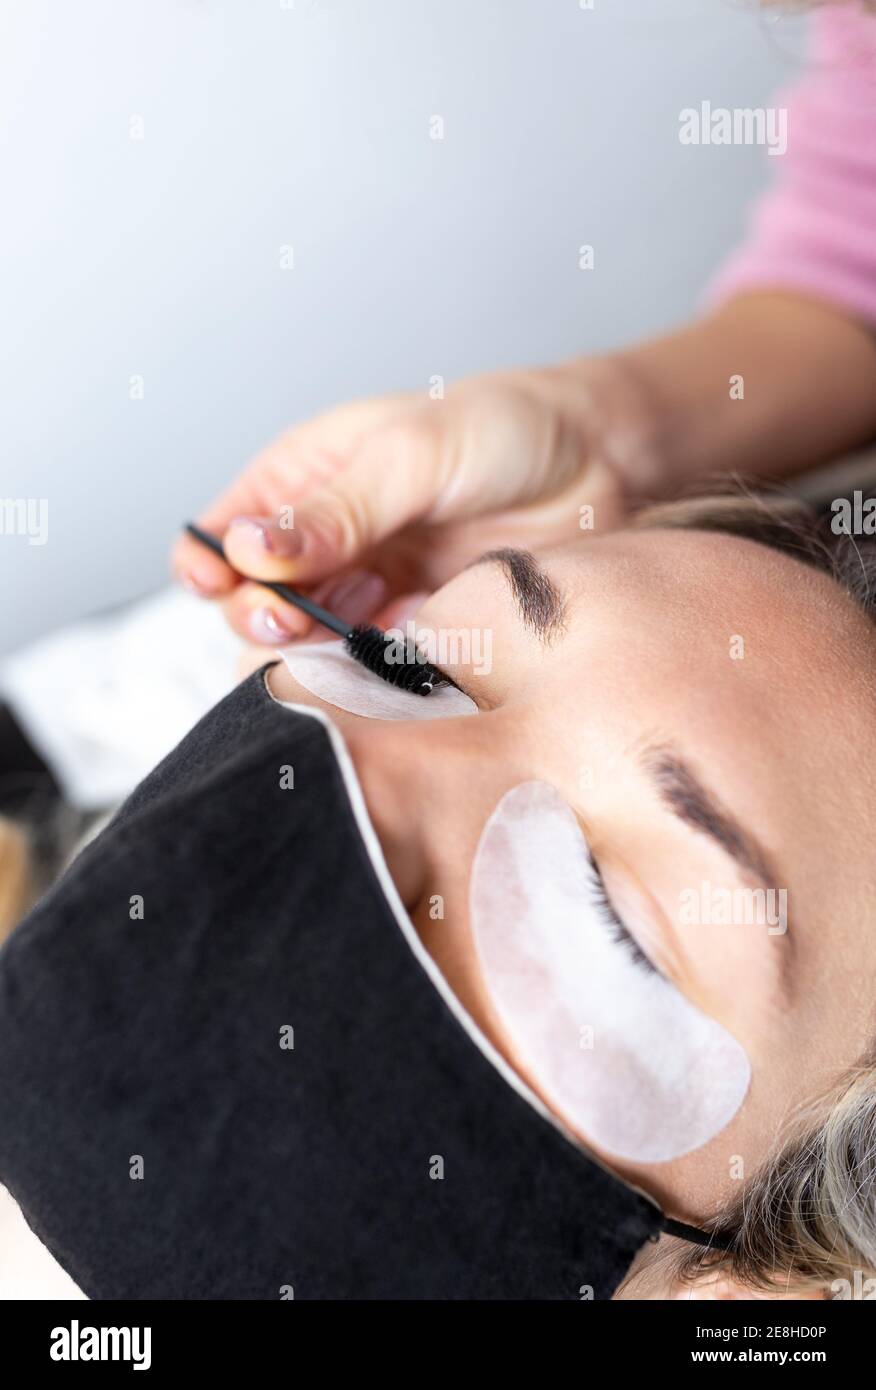 Professional beautician applying artificial eyelashes on young female client wearing protective face mask in modern beauty studio Stock Photo